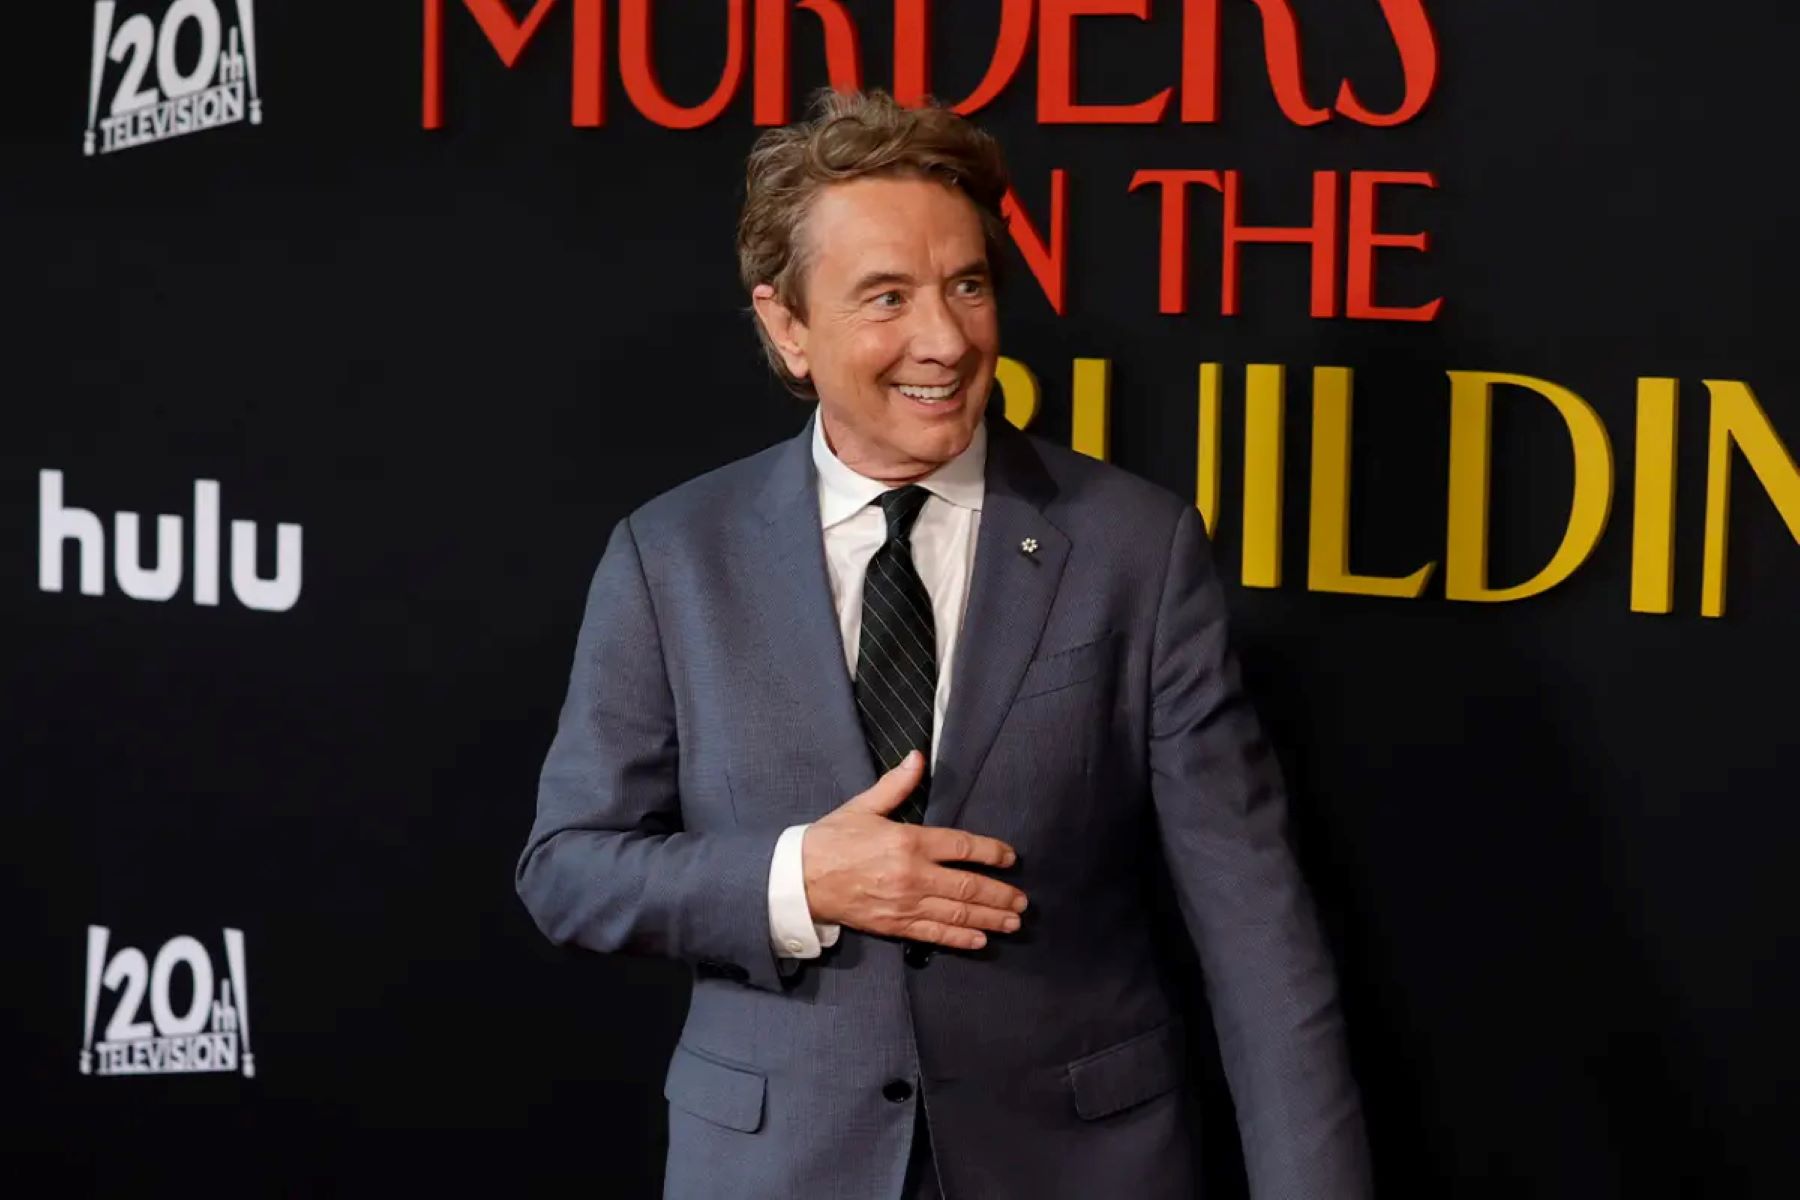 Martin Short Attacked In Op-Ed Piece, Fans Rally To His Defense